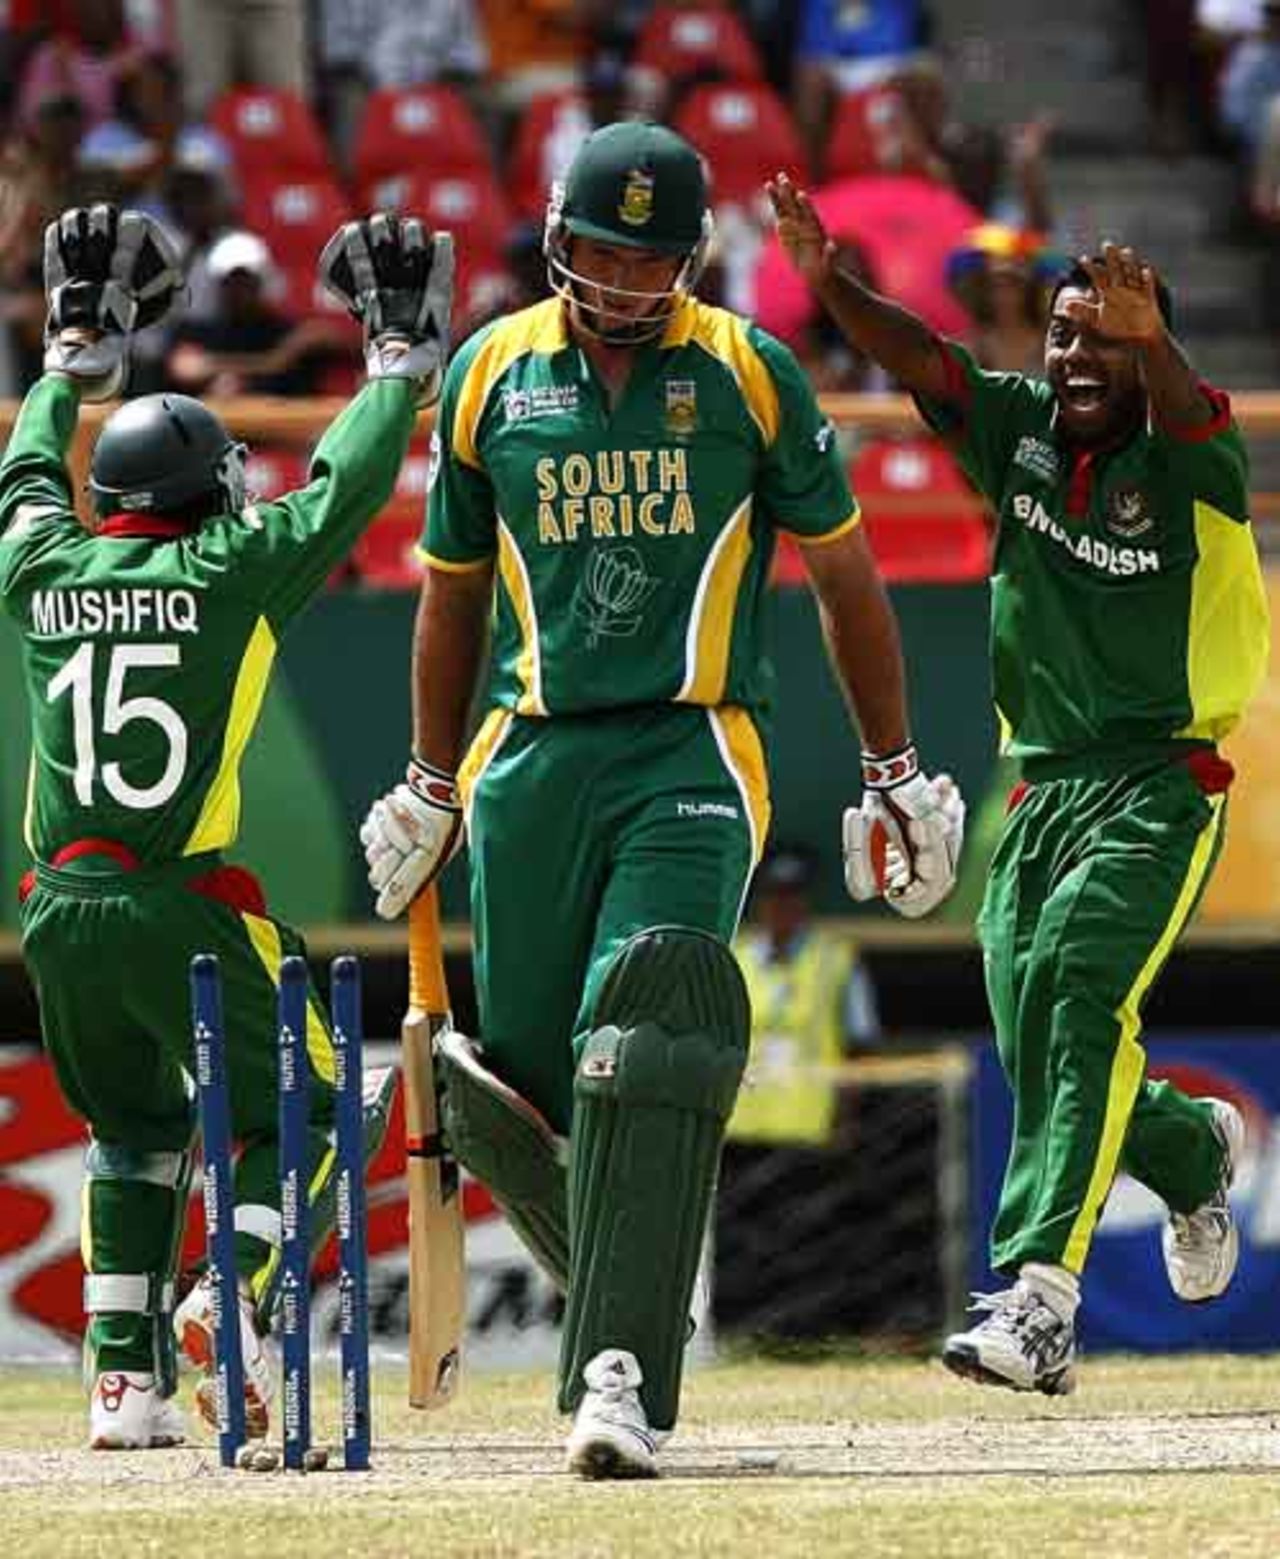 Syed Rasel celebrates the wicket of Graeme Smith, Bangladesh vs South Africa, Super Eights, Guyana, April 7, 2007